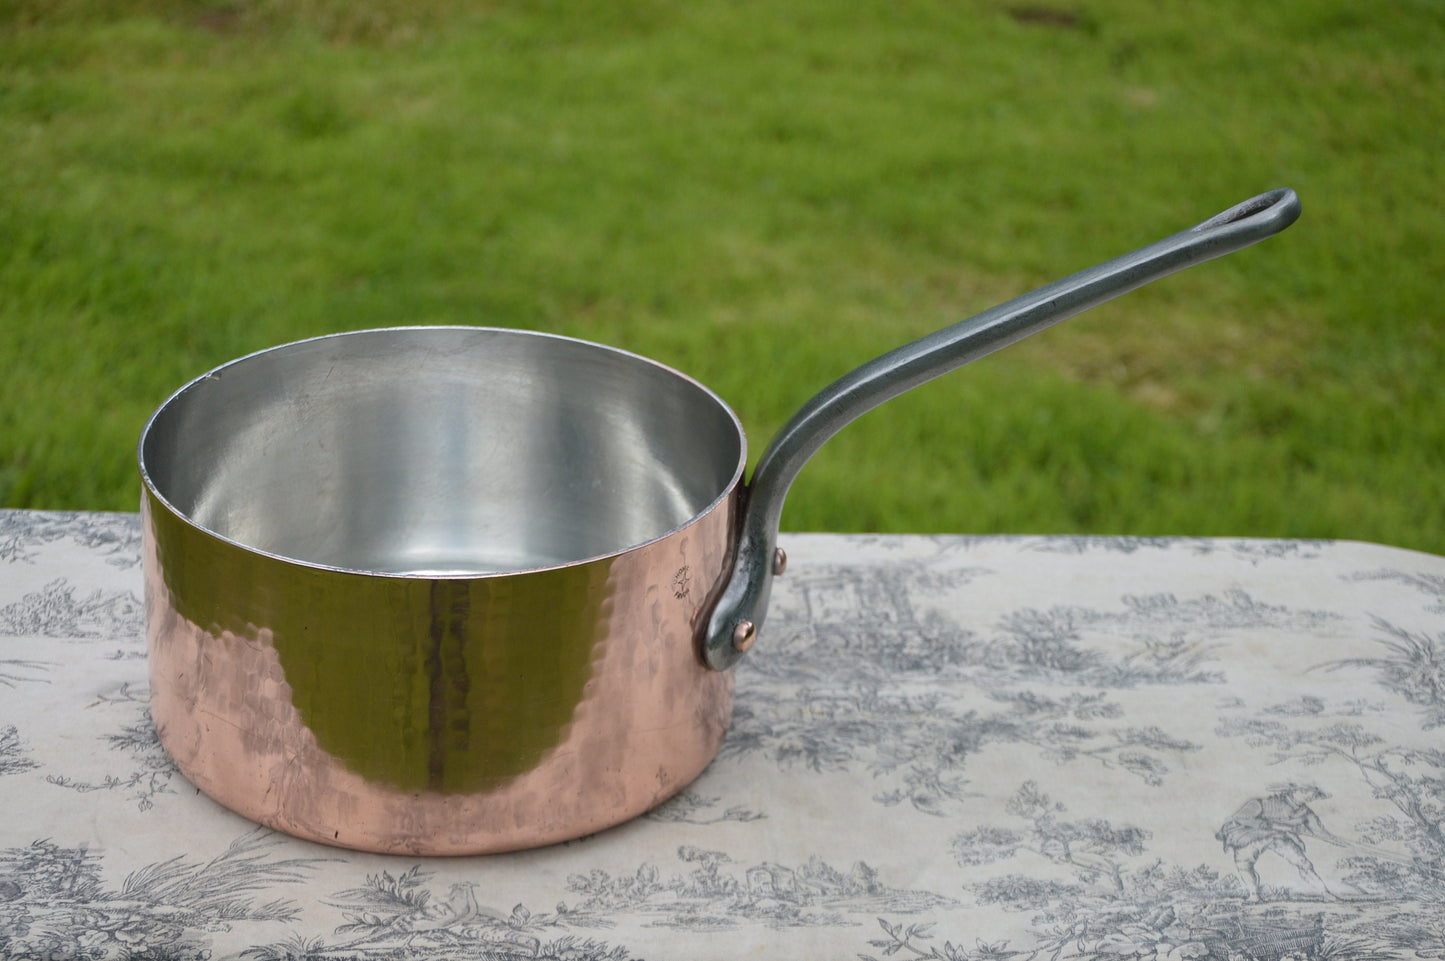 Vintage Chomette Favor BIG Saucepan French Copper 24cm 9 1/2 inch 2.9mm New Tin Lined Professional Stockpan Pot 4 k Cast Iron Handle